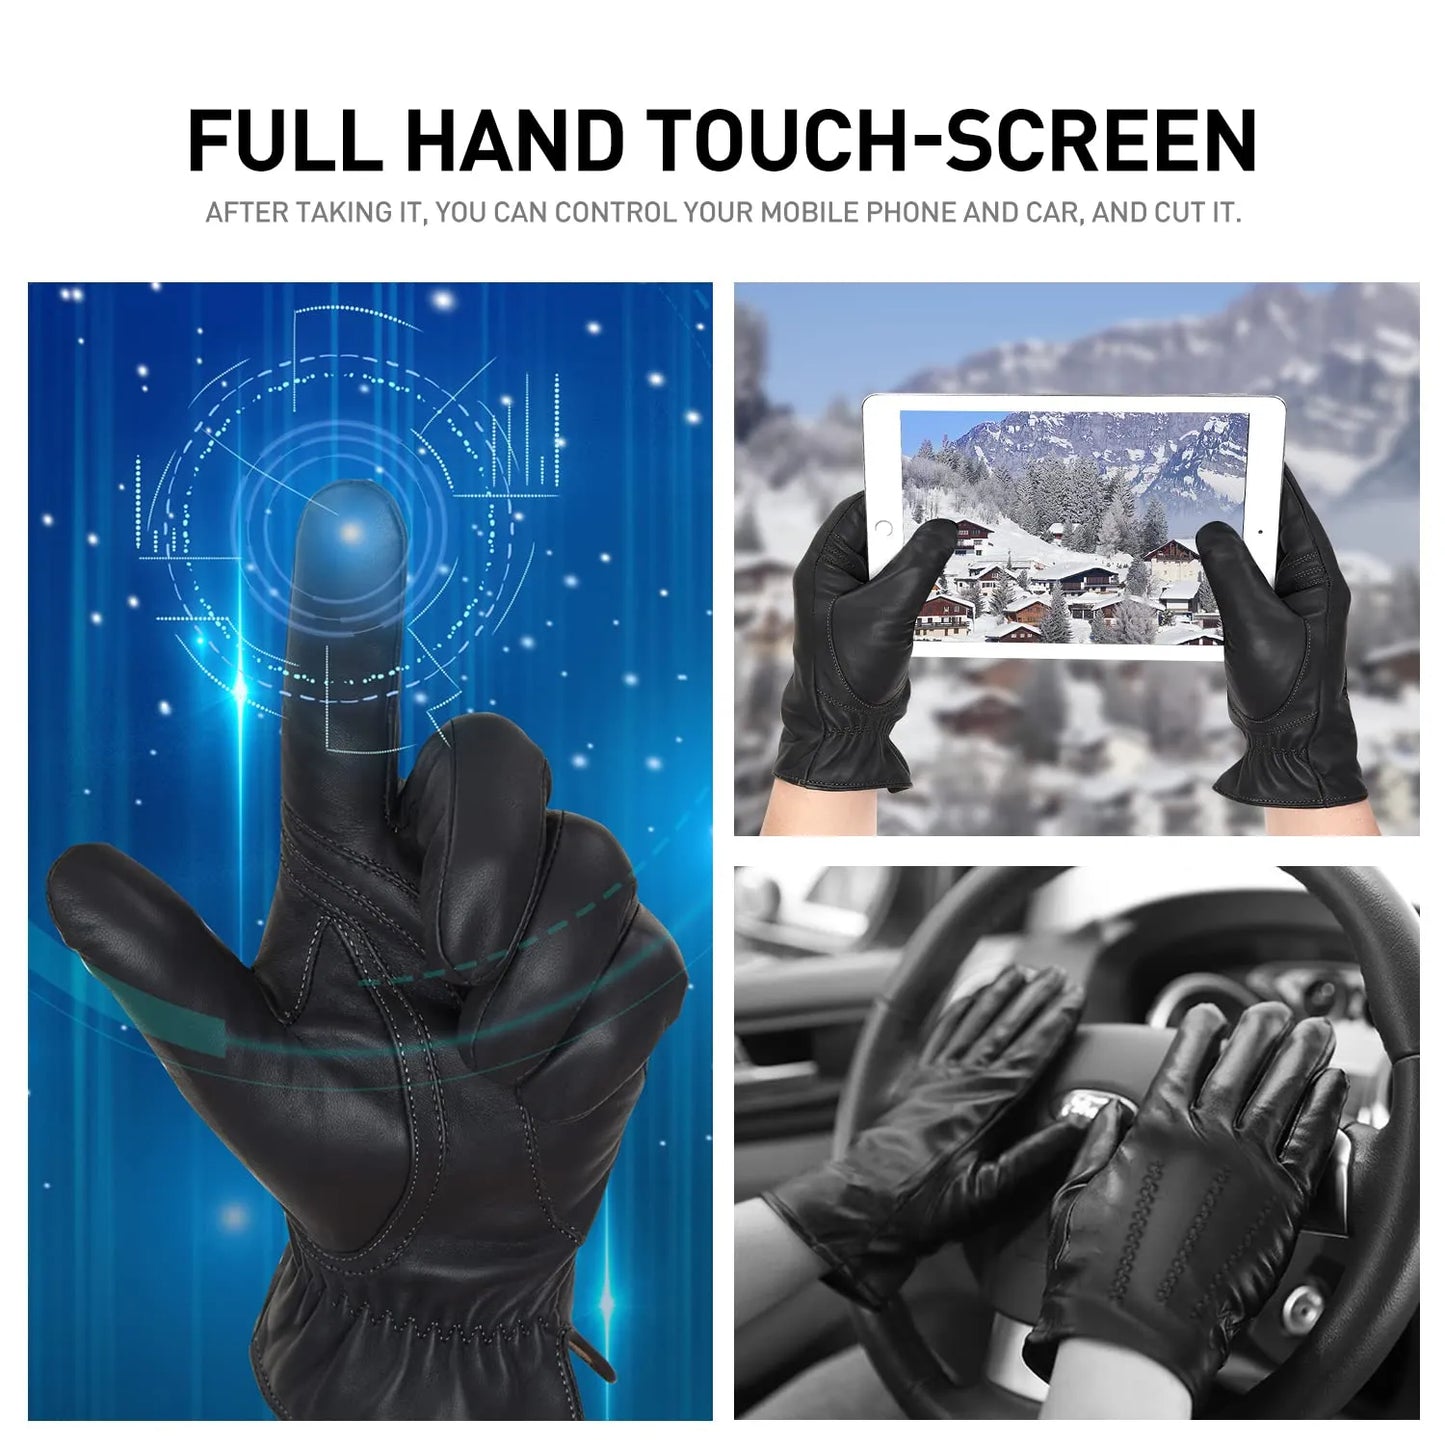 Stay Stylishly Warm with Men's Fashionable Sheepskin Gloves - Cashmere Lined, Touchscreen Compatible, Full Finger Gloves for Winter Riding and Driving.